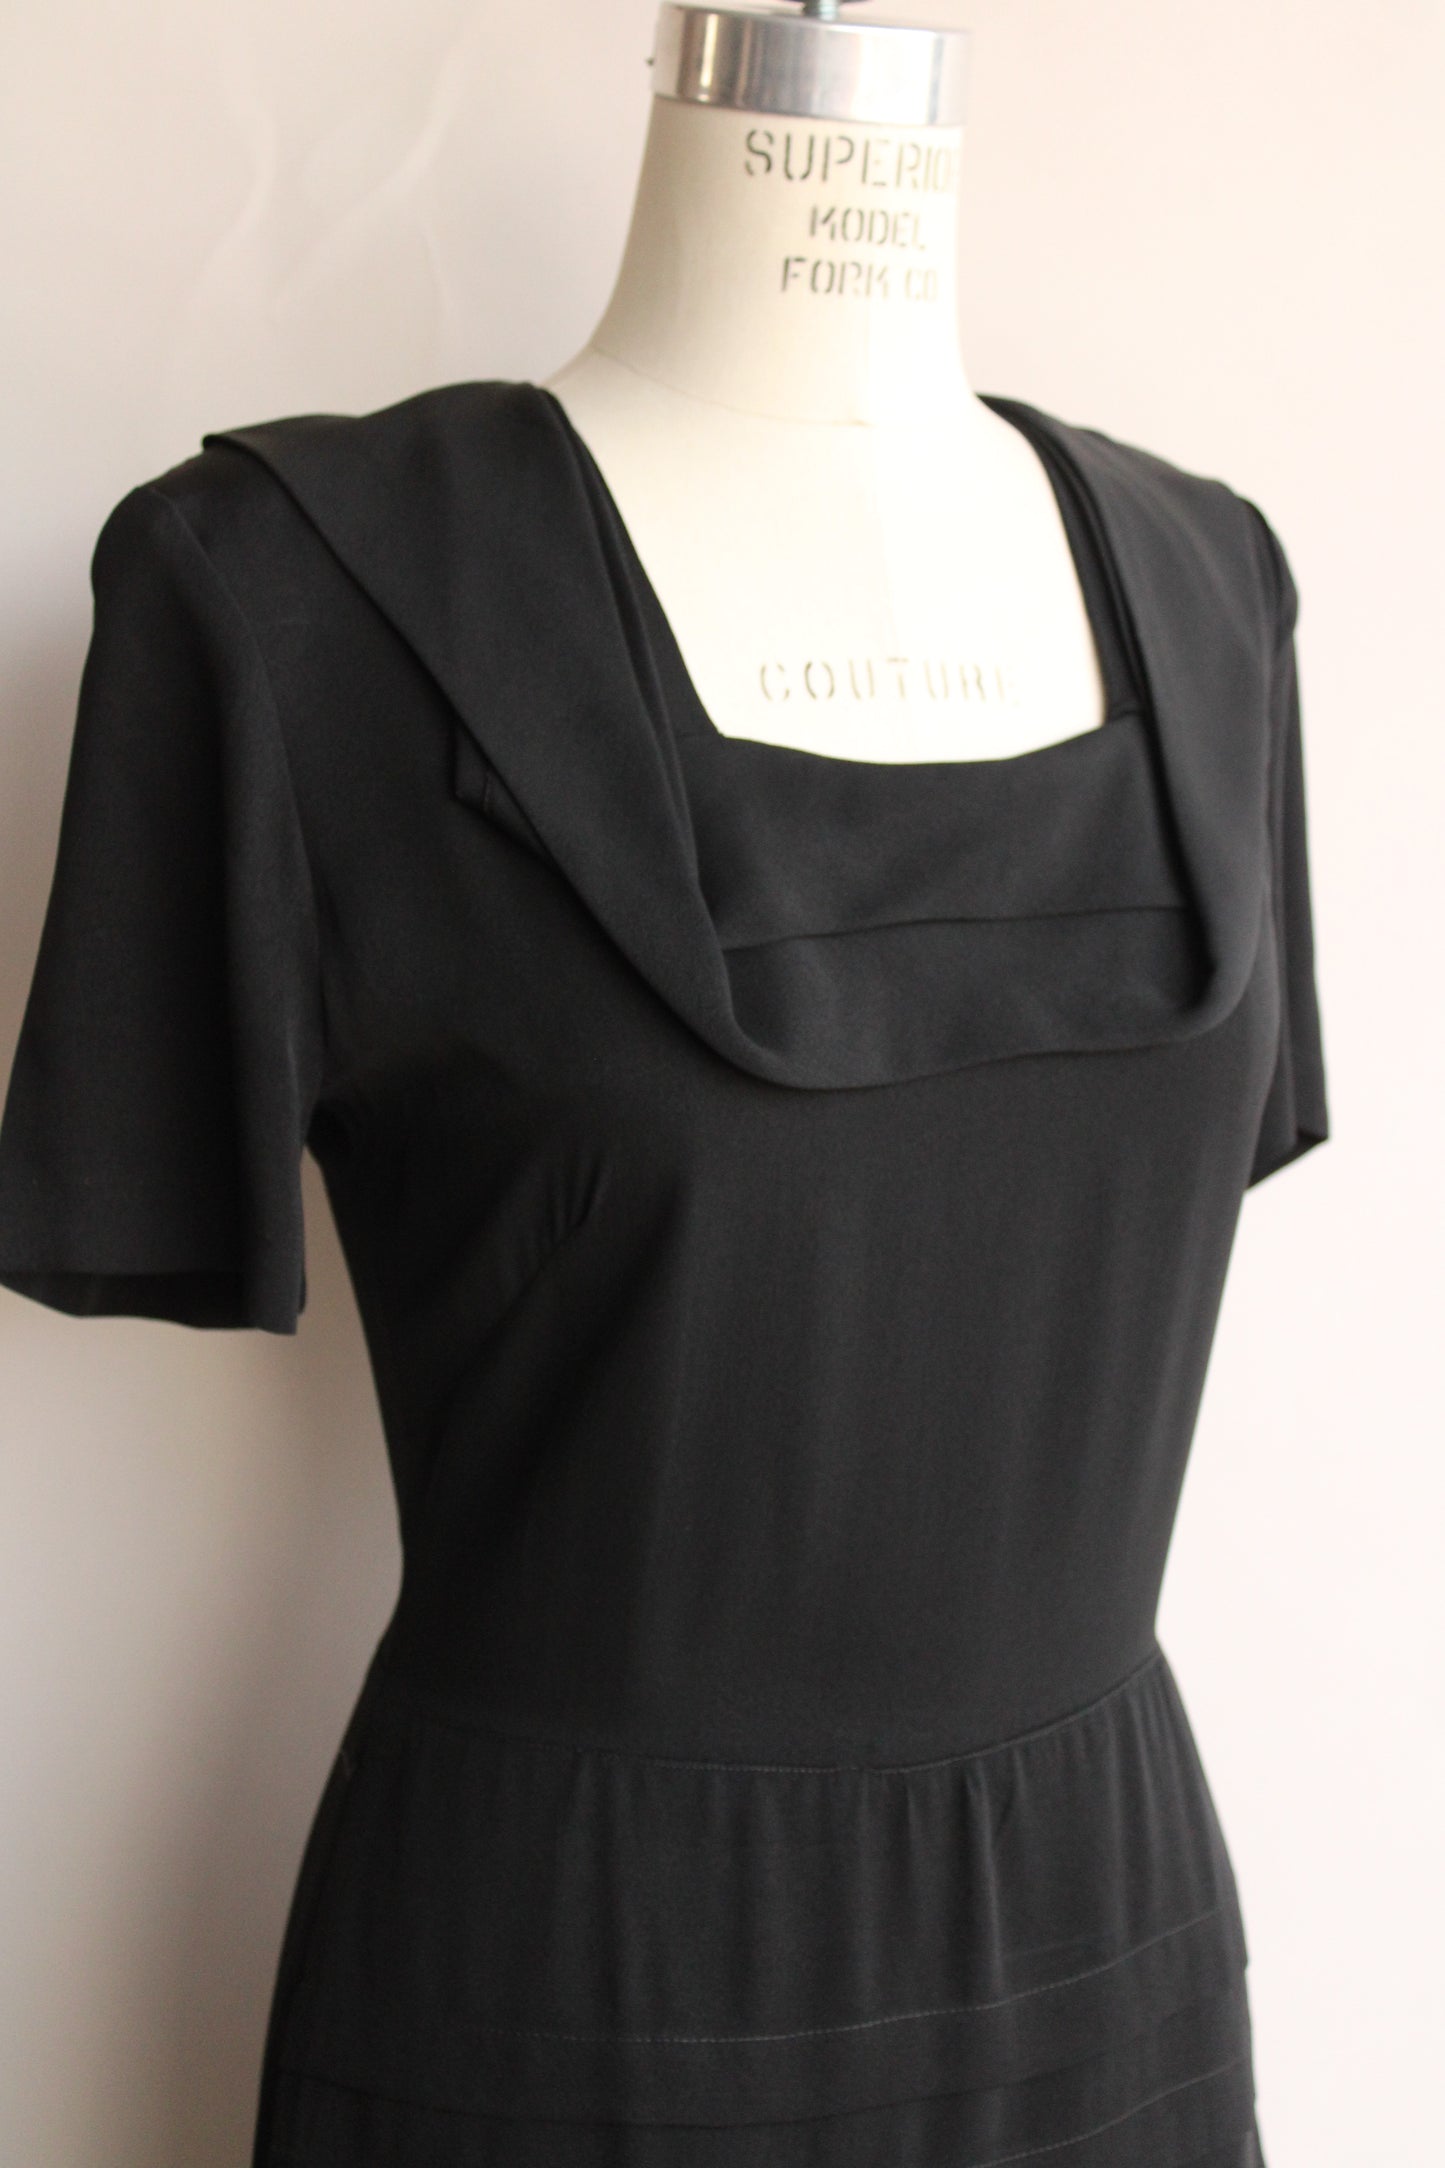 Vintage 1940s Black Rayon Dress With Square Shawl Collar